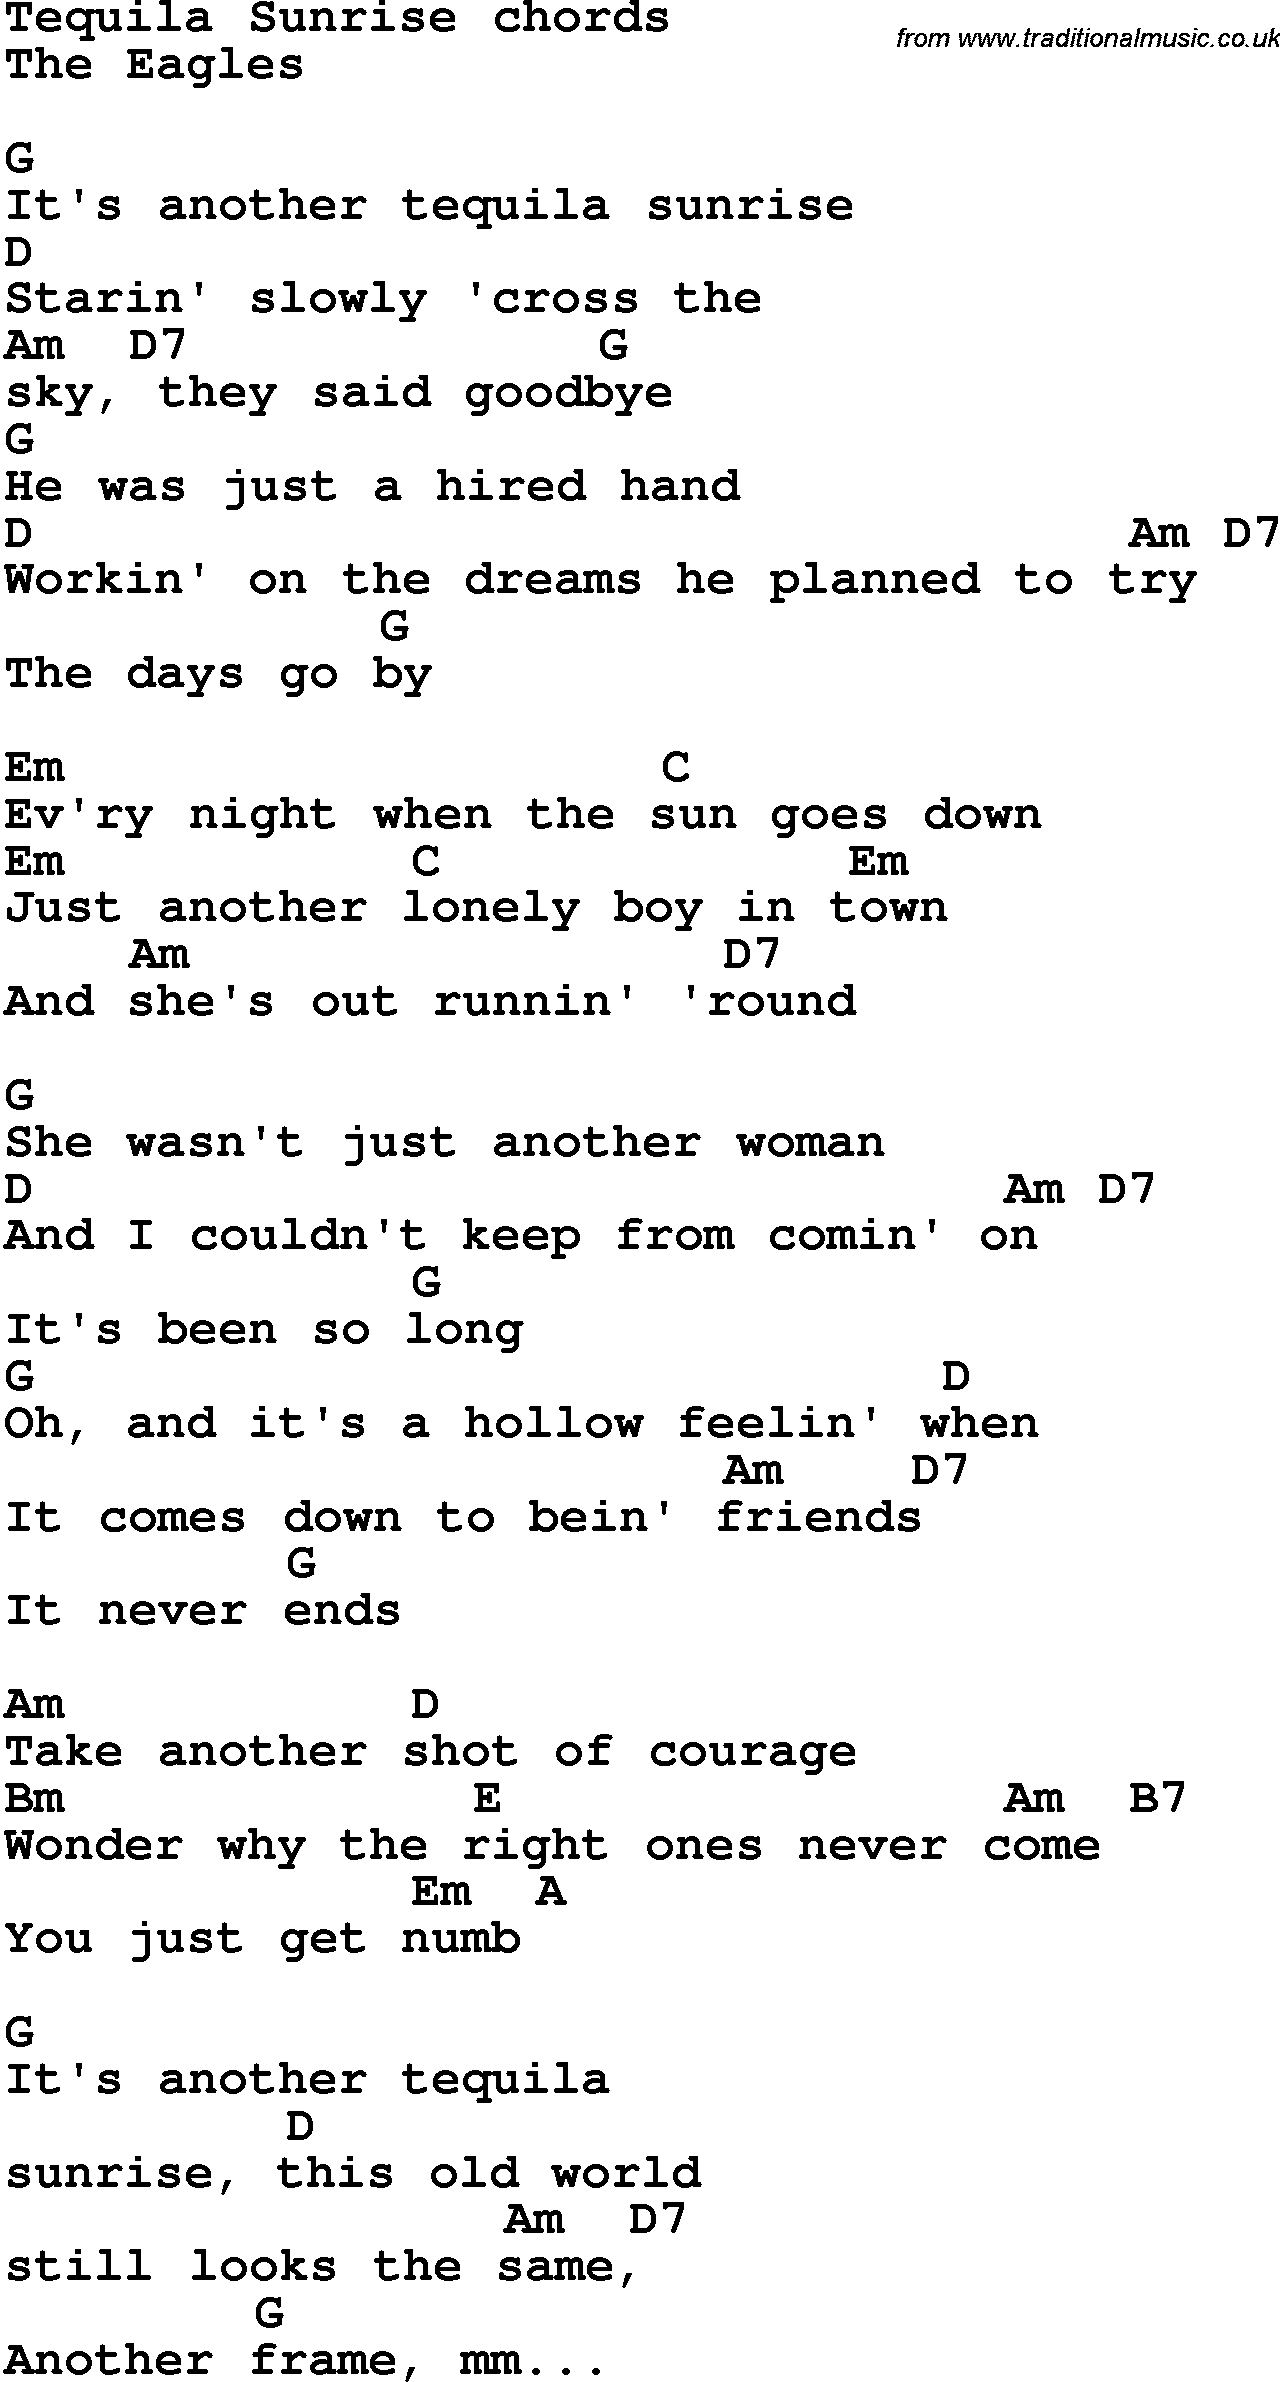 Hotel California Chords Song Lyrics With Guitar Chords For Tequila Sunrise The Eagles